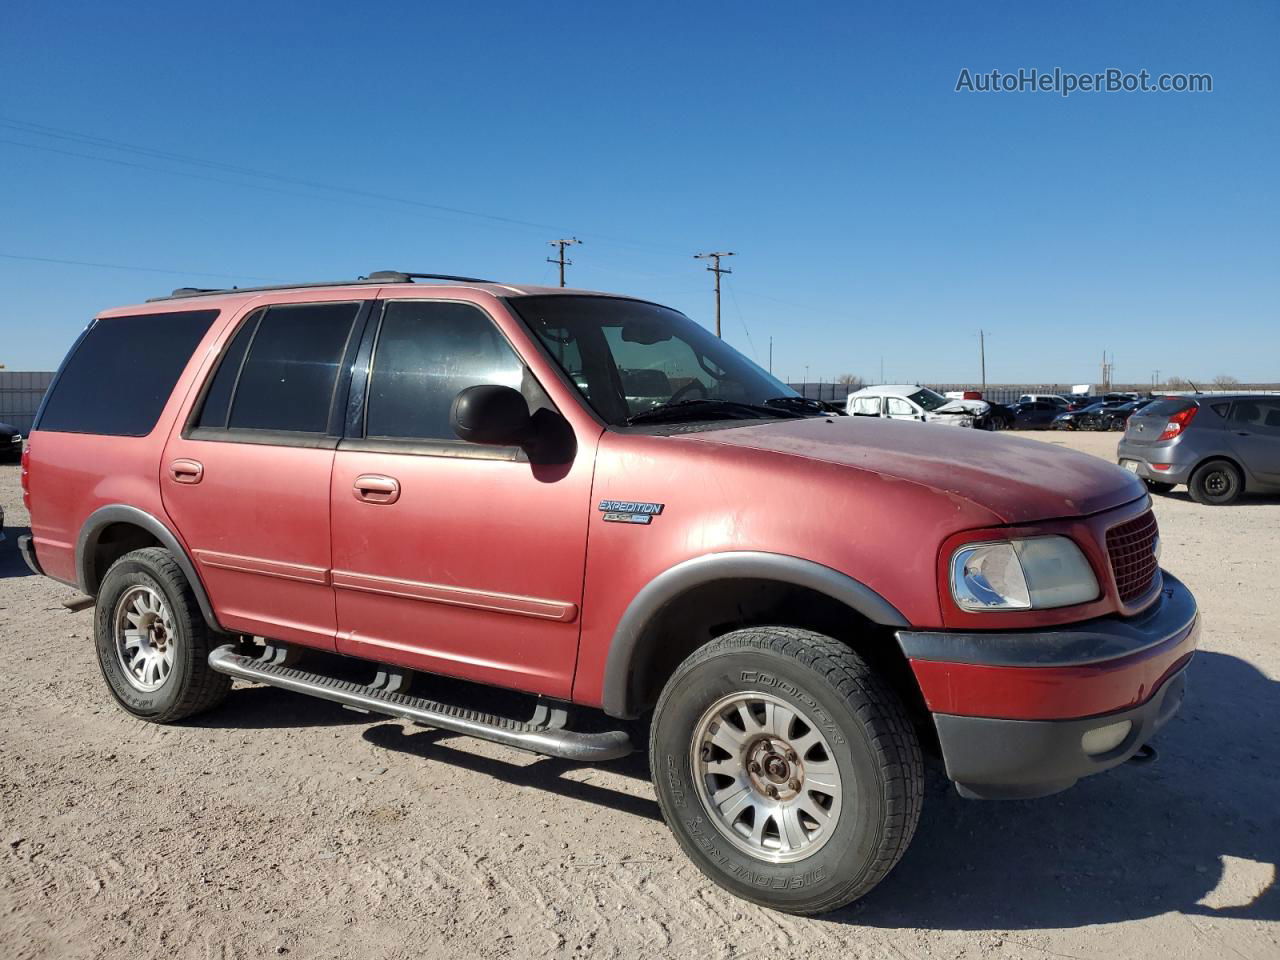 2000 Ford Expedition Xlt Red vin: 1FMPU16LXYLC48353